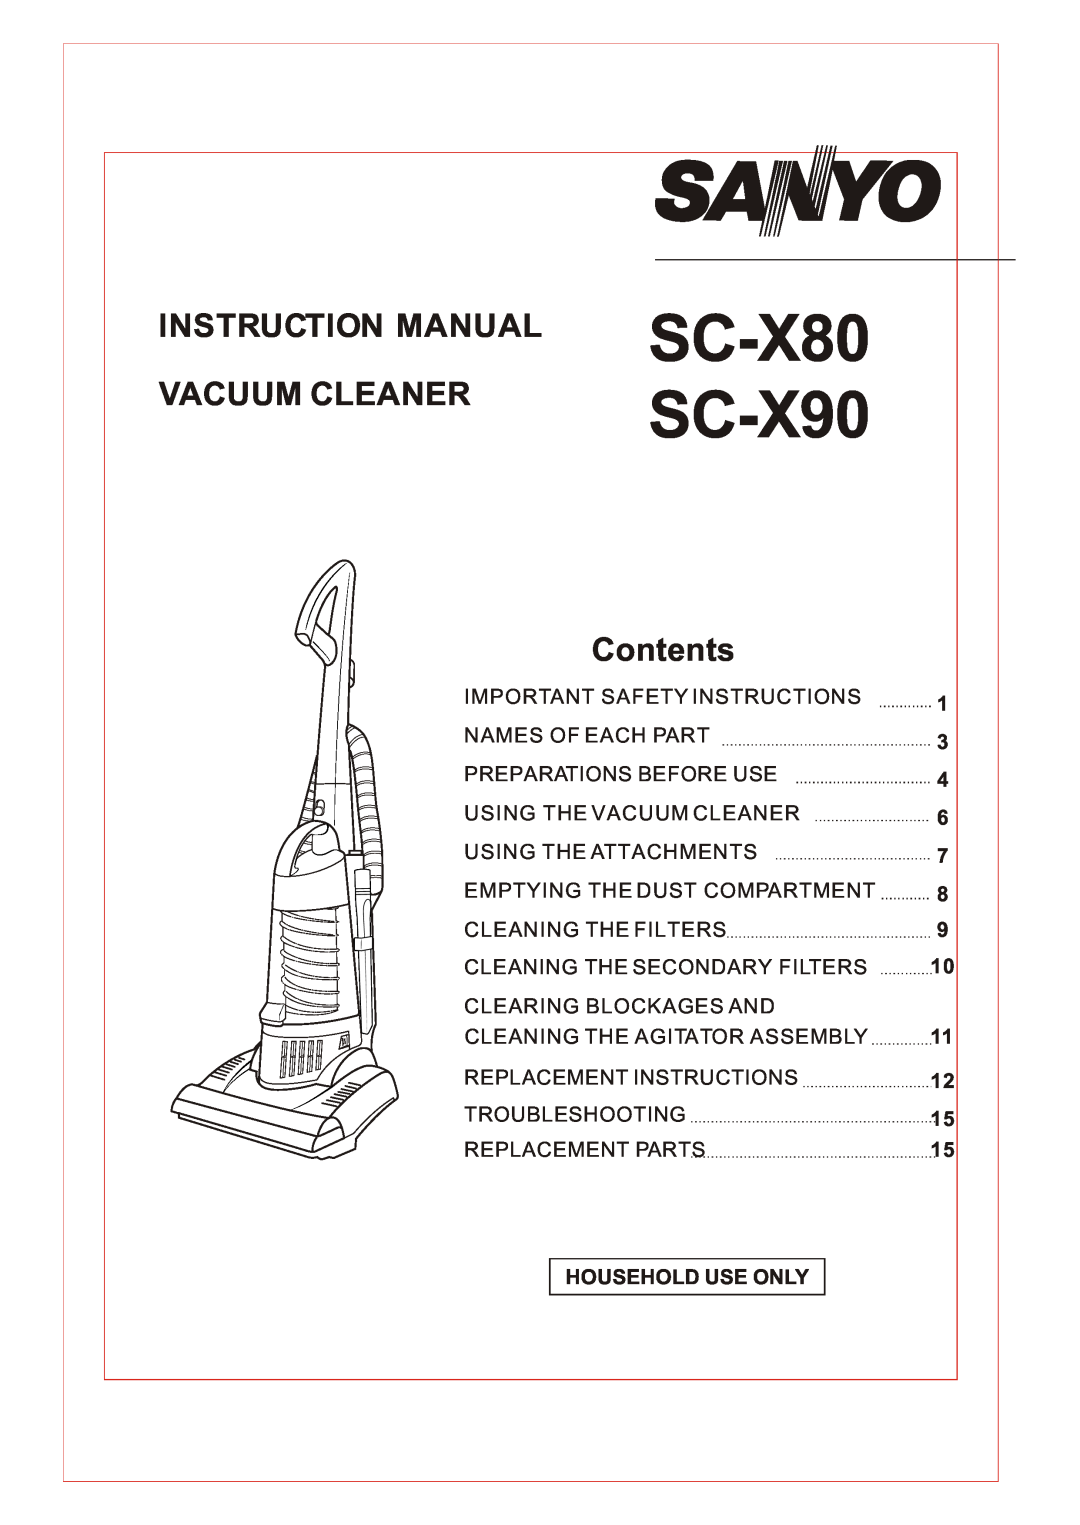 Sanyo SC-X90 instruction manual 1 3 4 6 7 8 9, Household Use Only, SC-X80, Vacuum Cleaner, Contents 